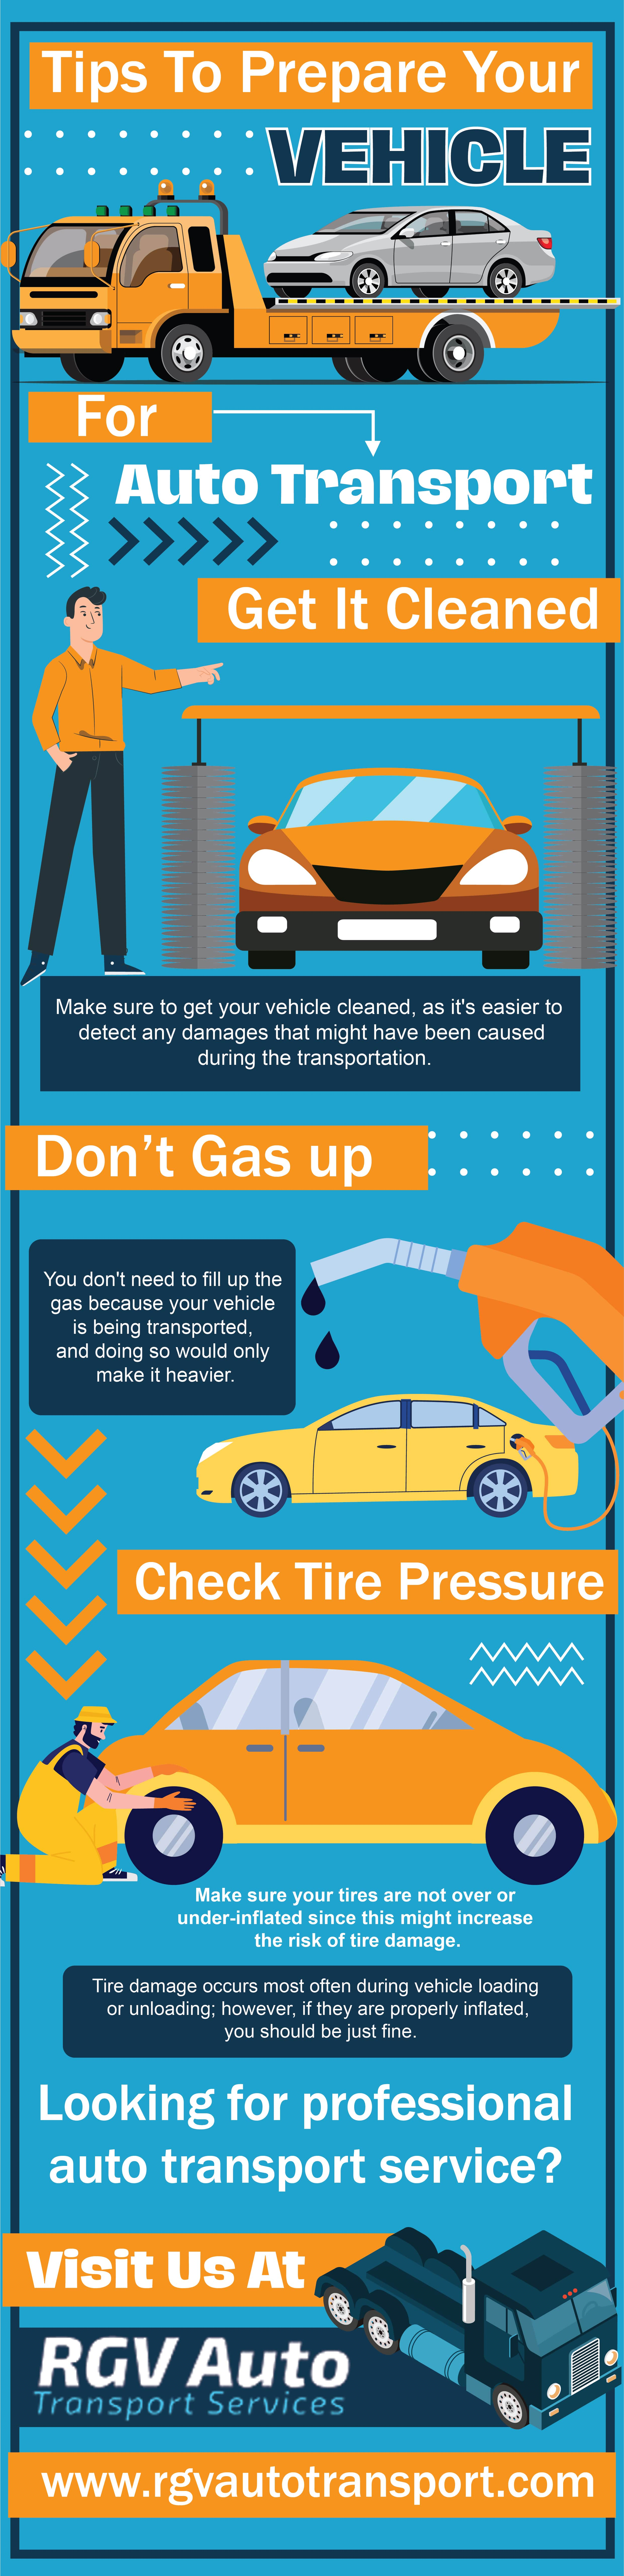 Tips To Prepare Your Vehicle For Auto Transport